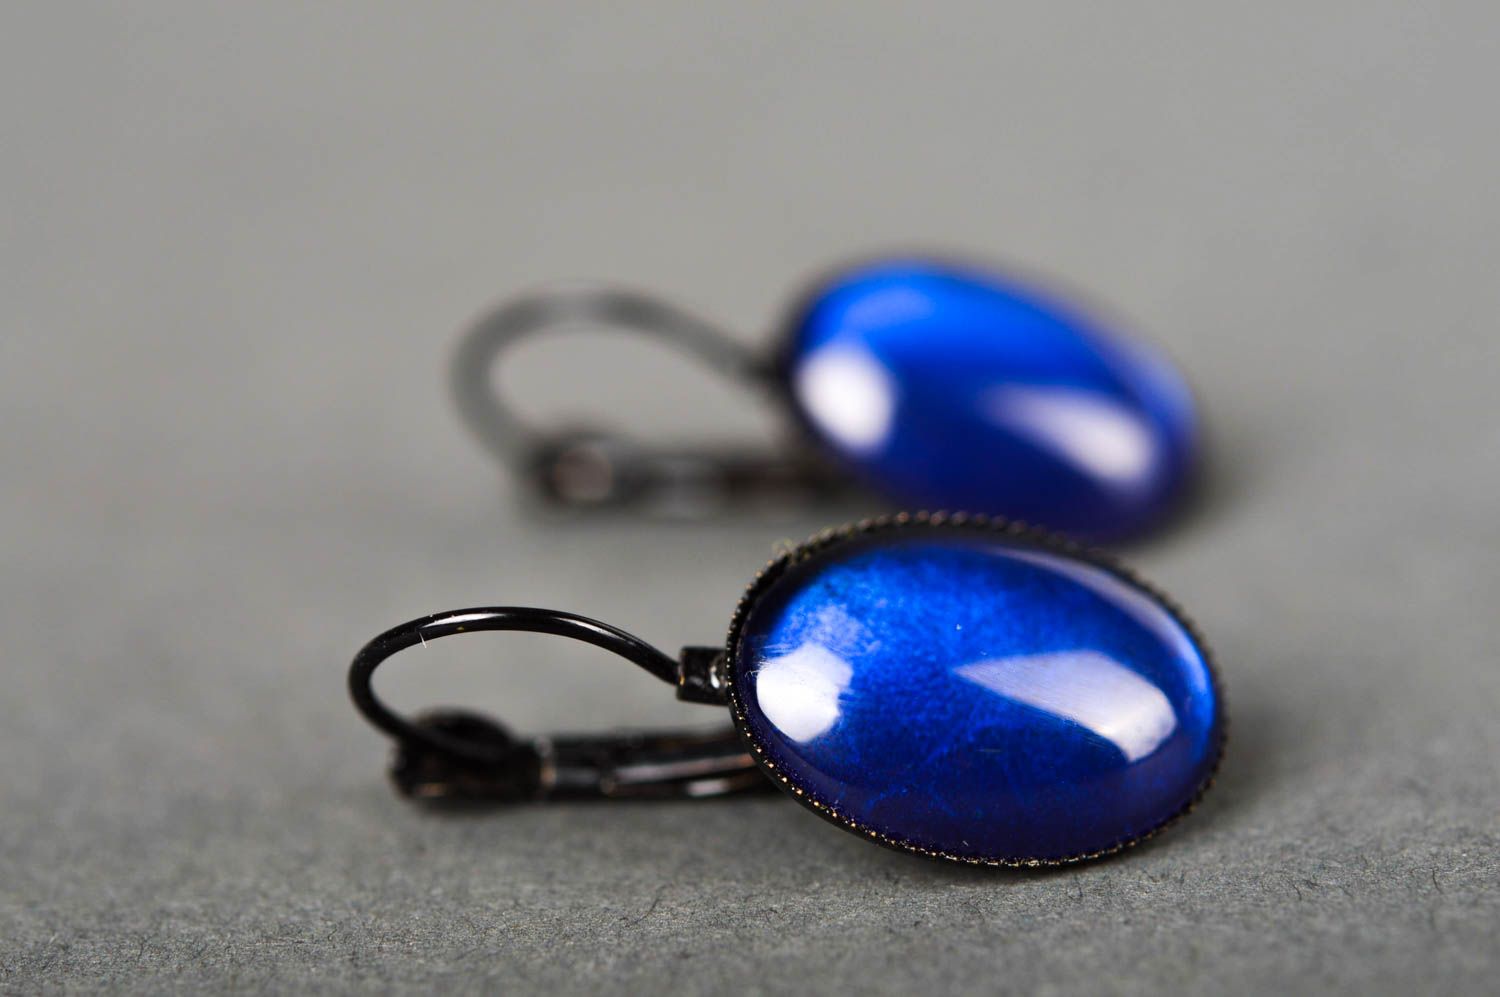 Handmade earrings with cabochons designer jewelry vintage accessories for women photo 3